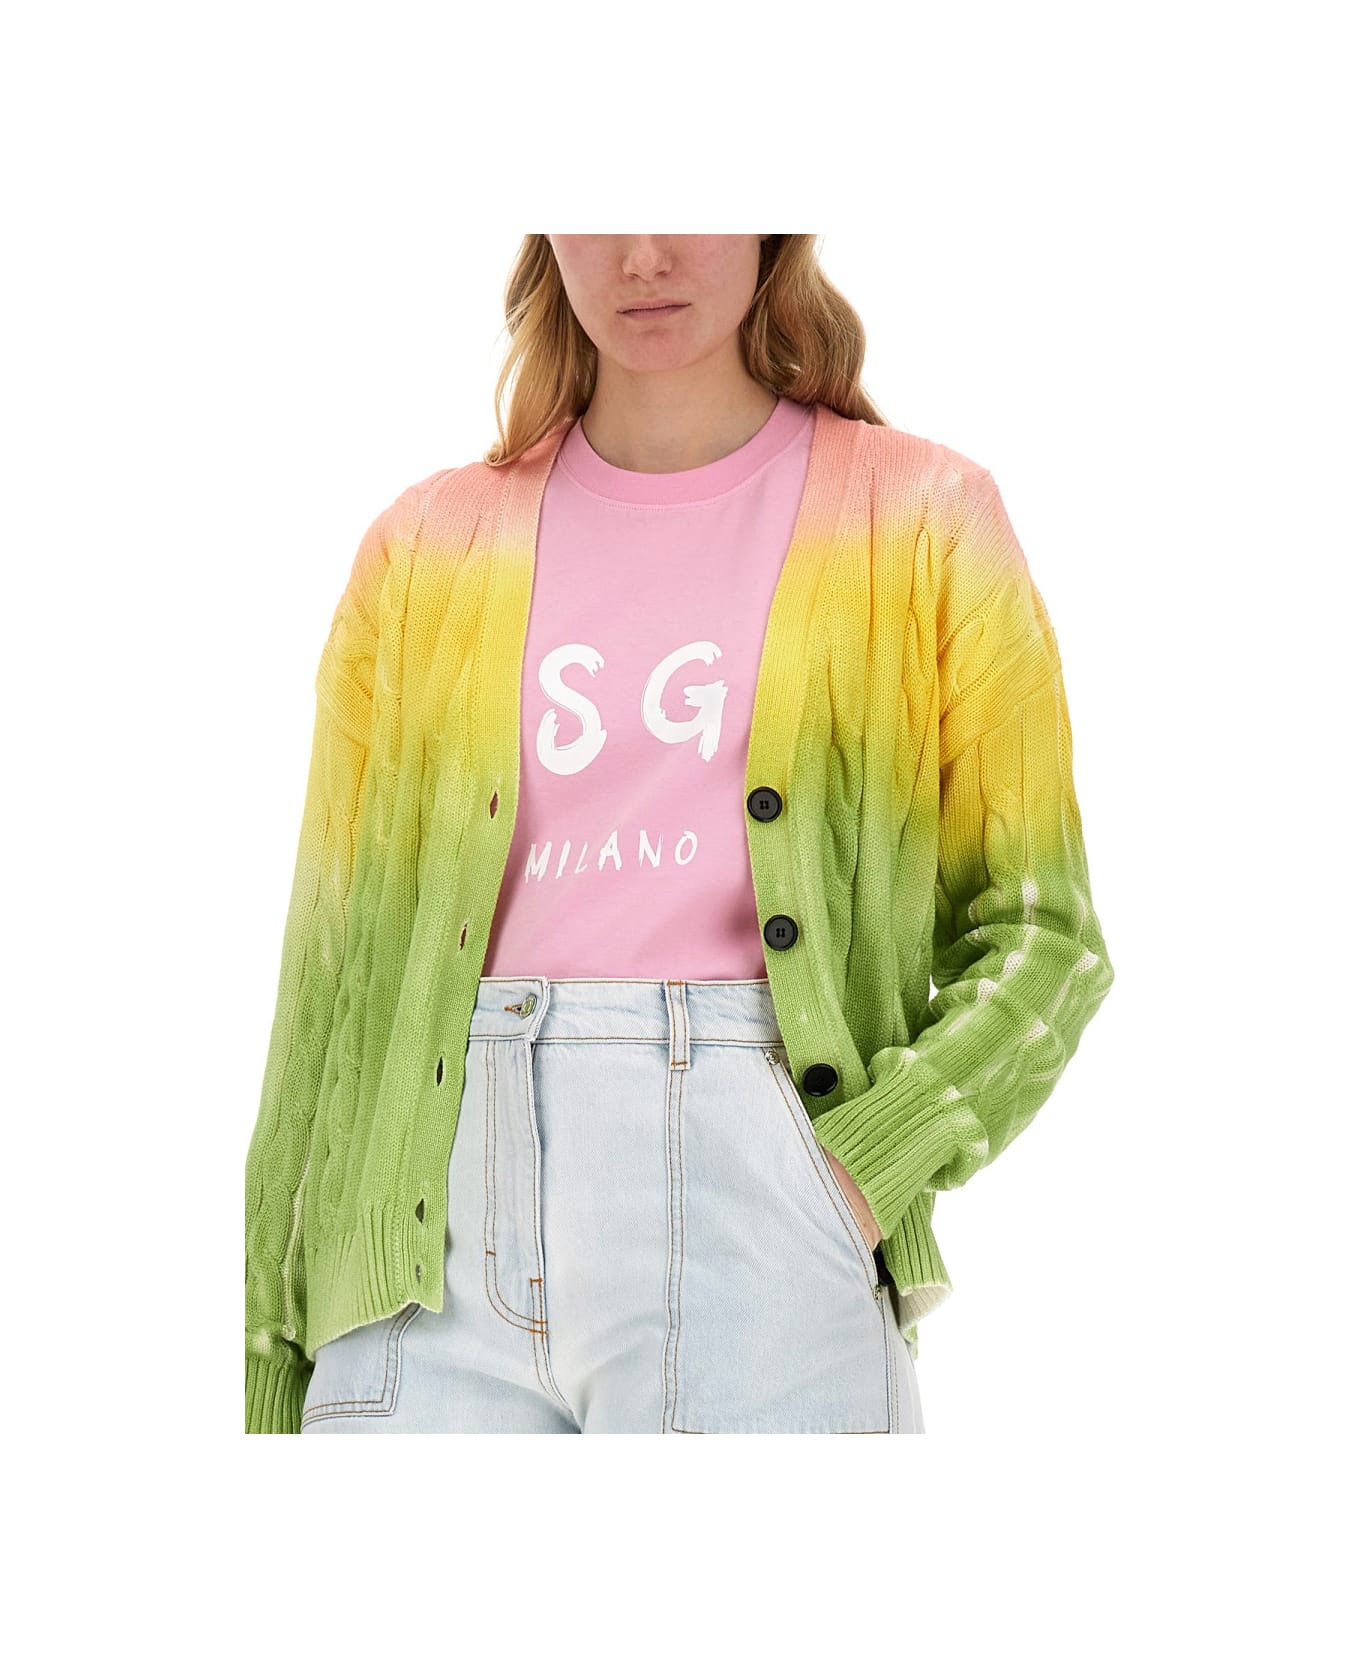 MSGM T-shirt With Logo - PINK Tシャツ